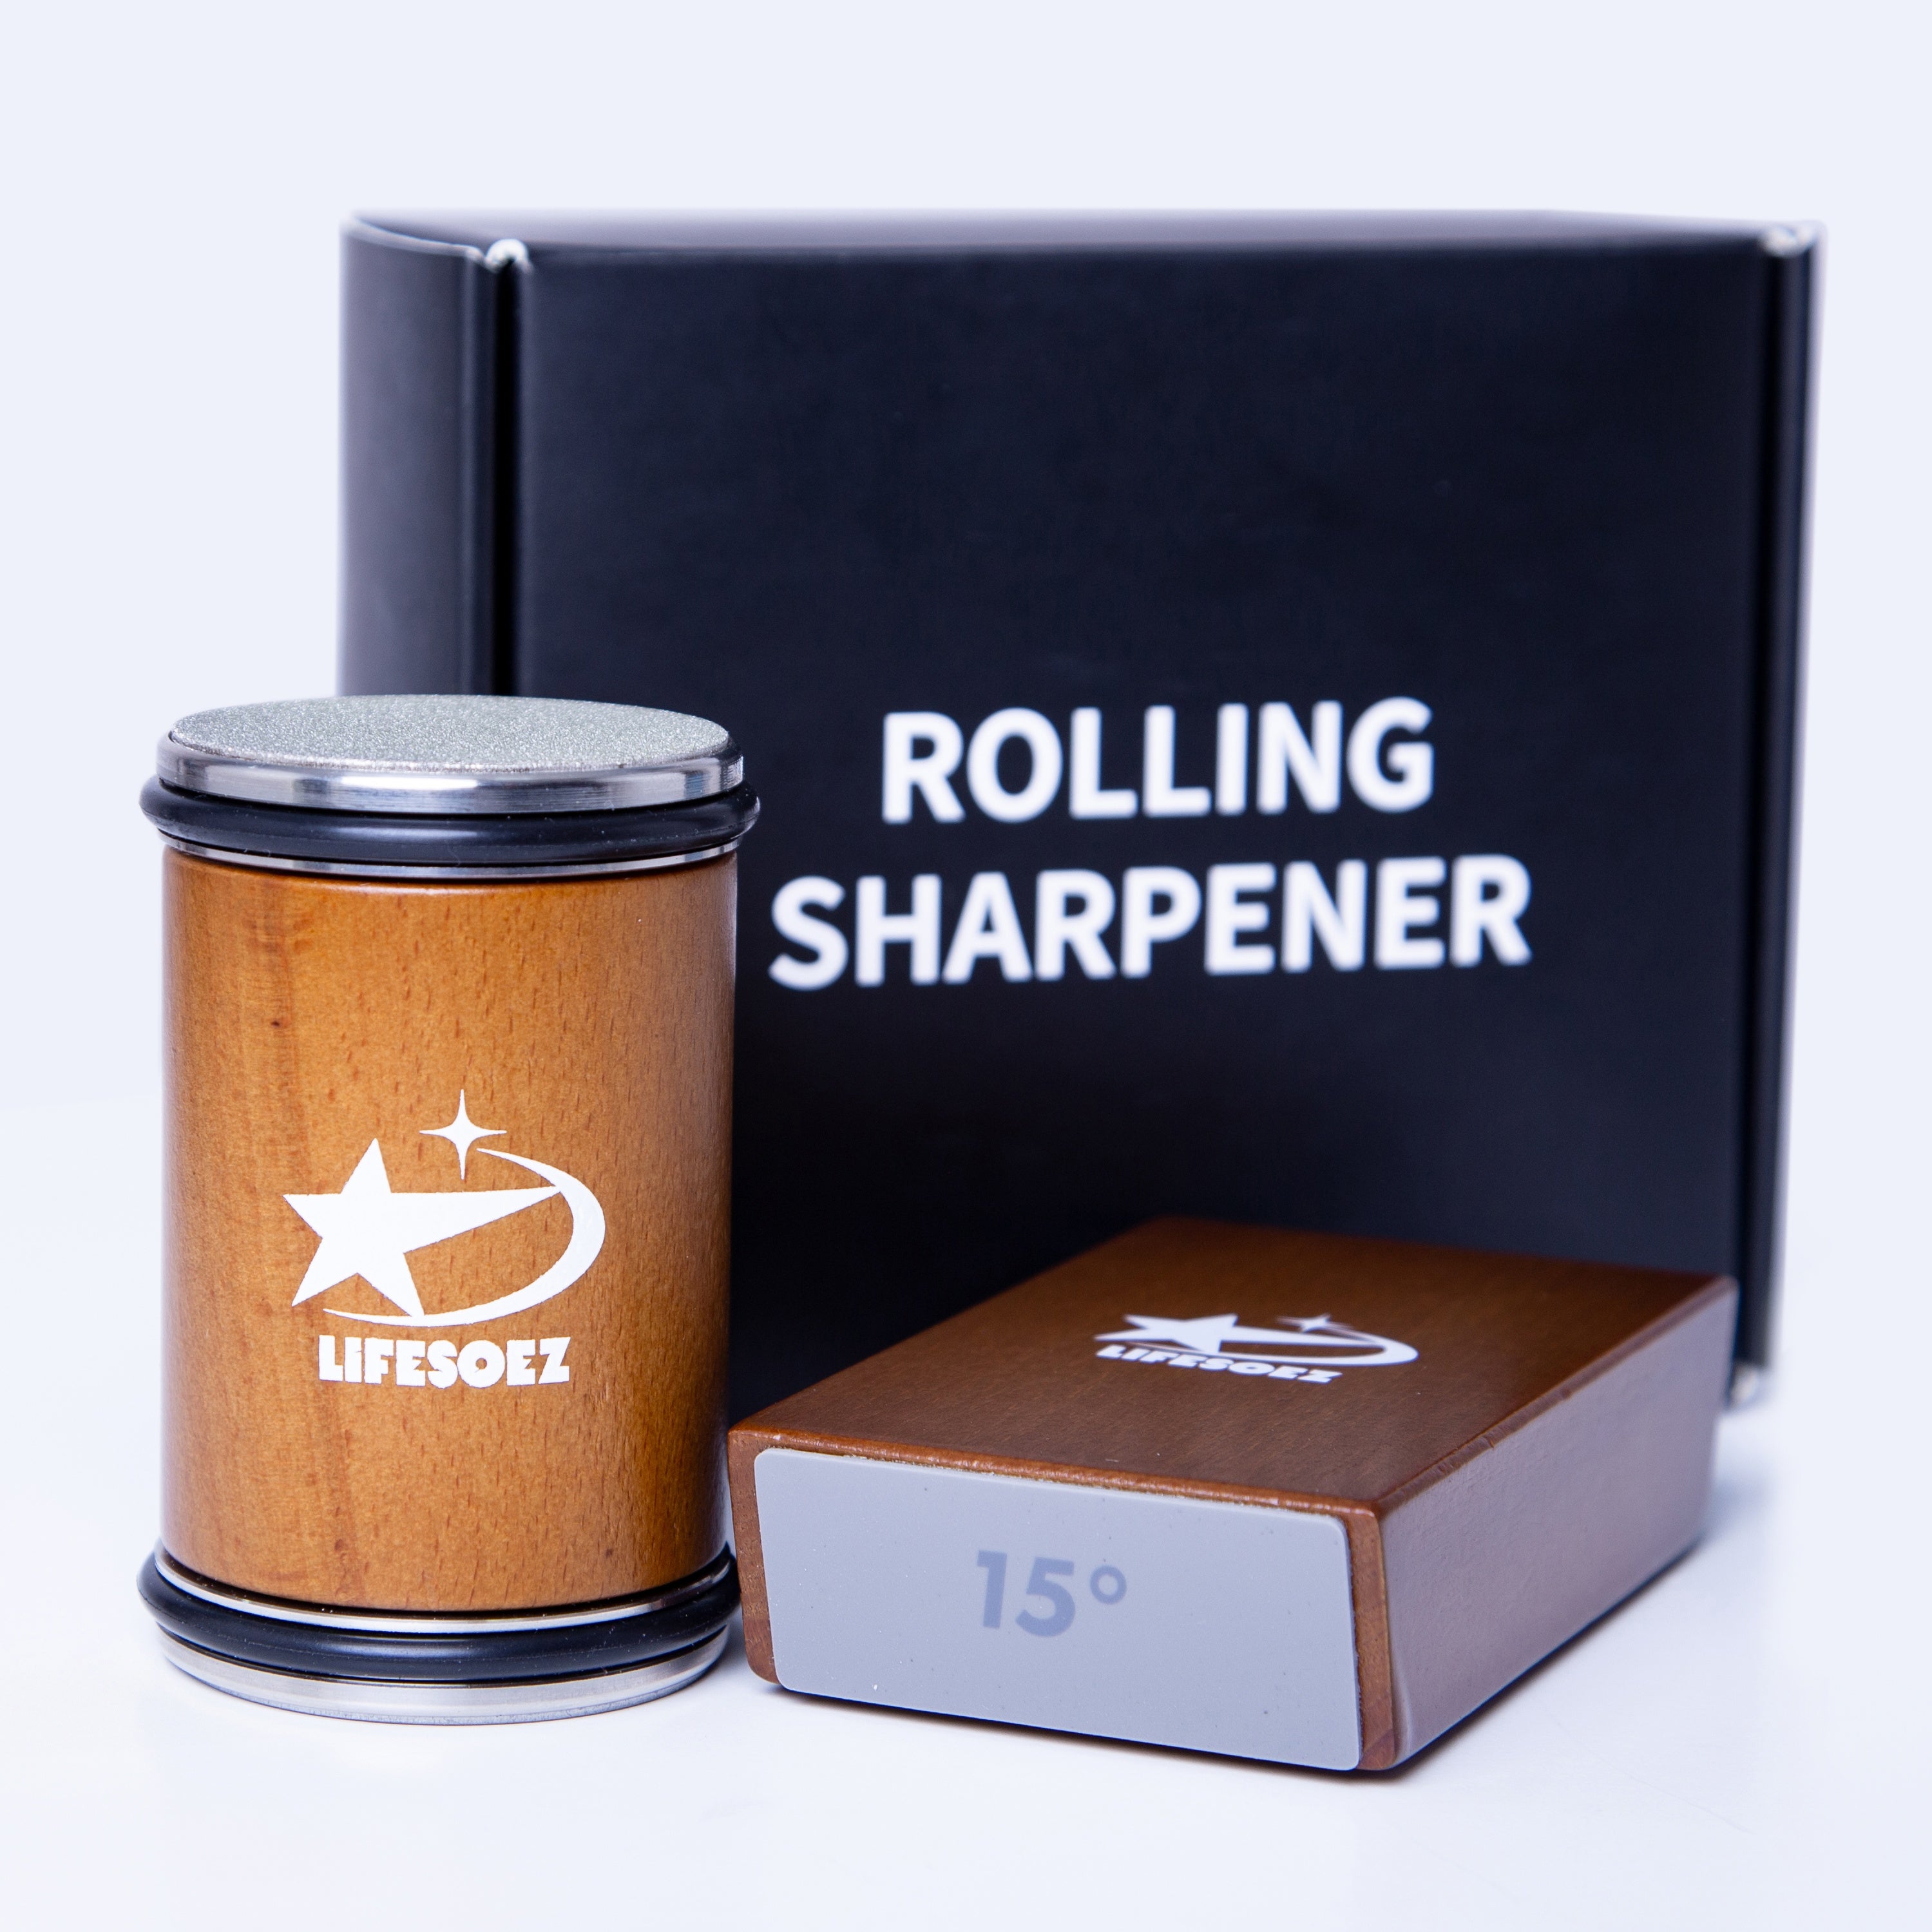 How to make a Roll Grinder for only $15 - The perfect sharpening